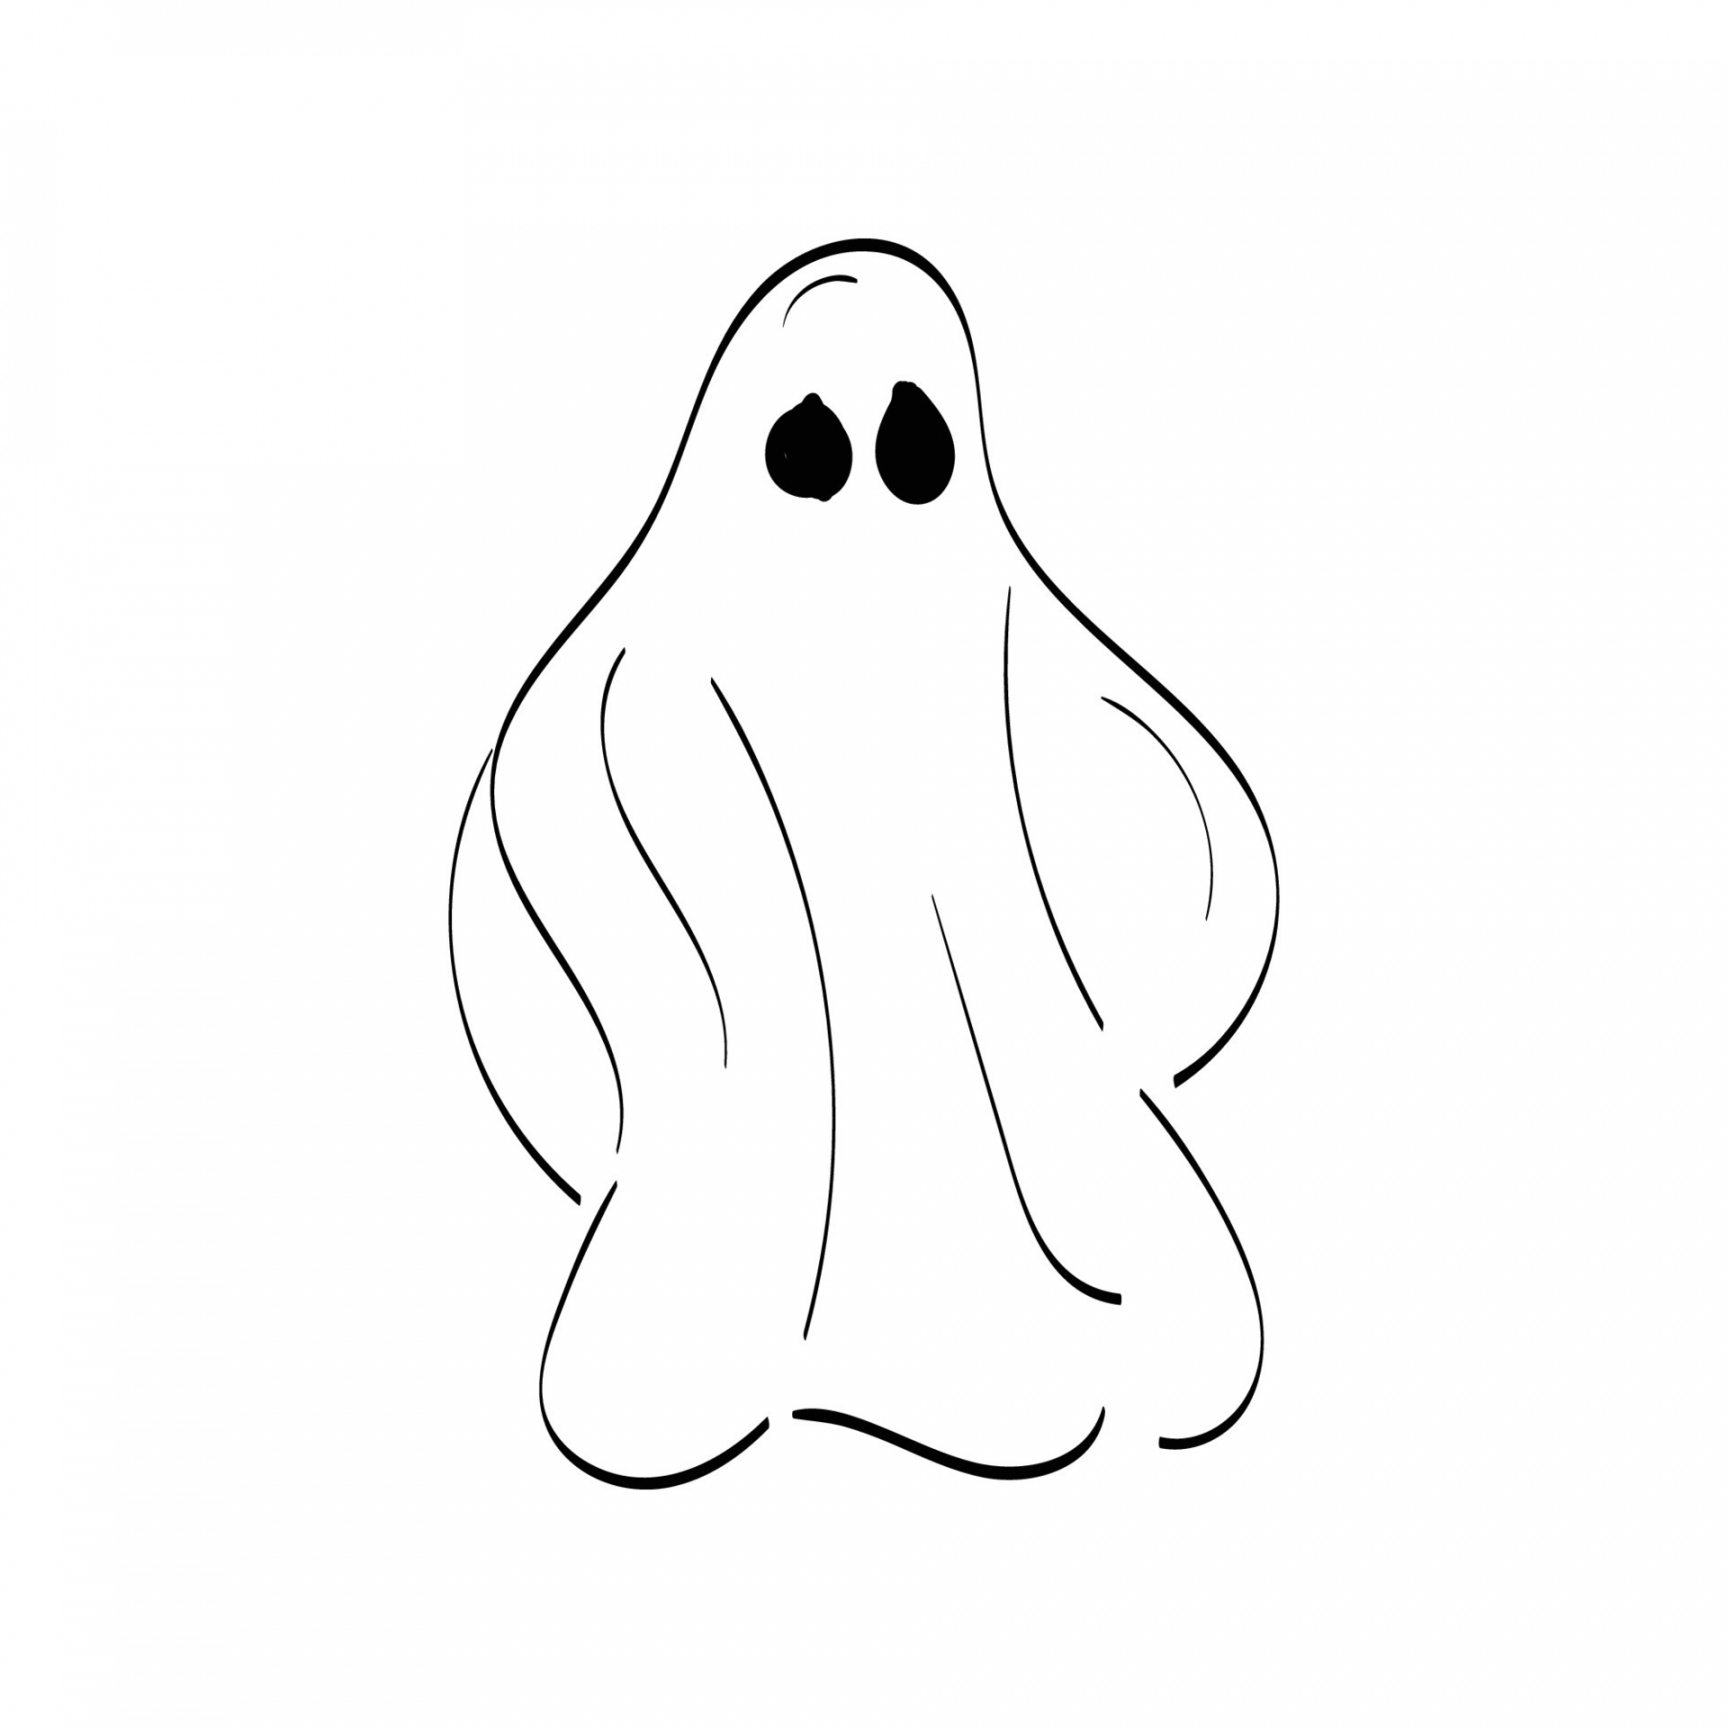 Halloween Ghost Outlines - Ghost Outline